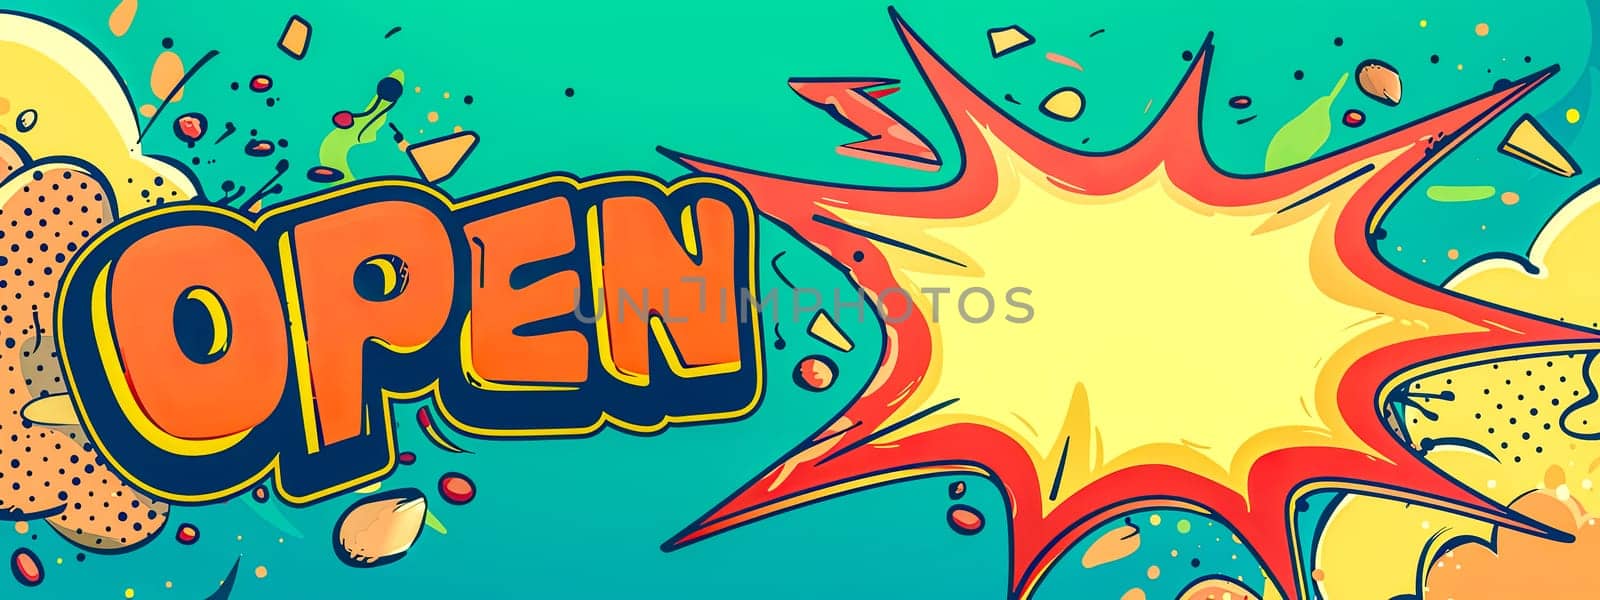 Colorful open sign comic style banner by Edophoto